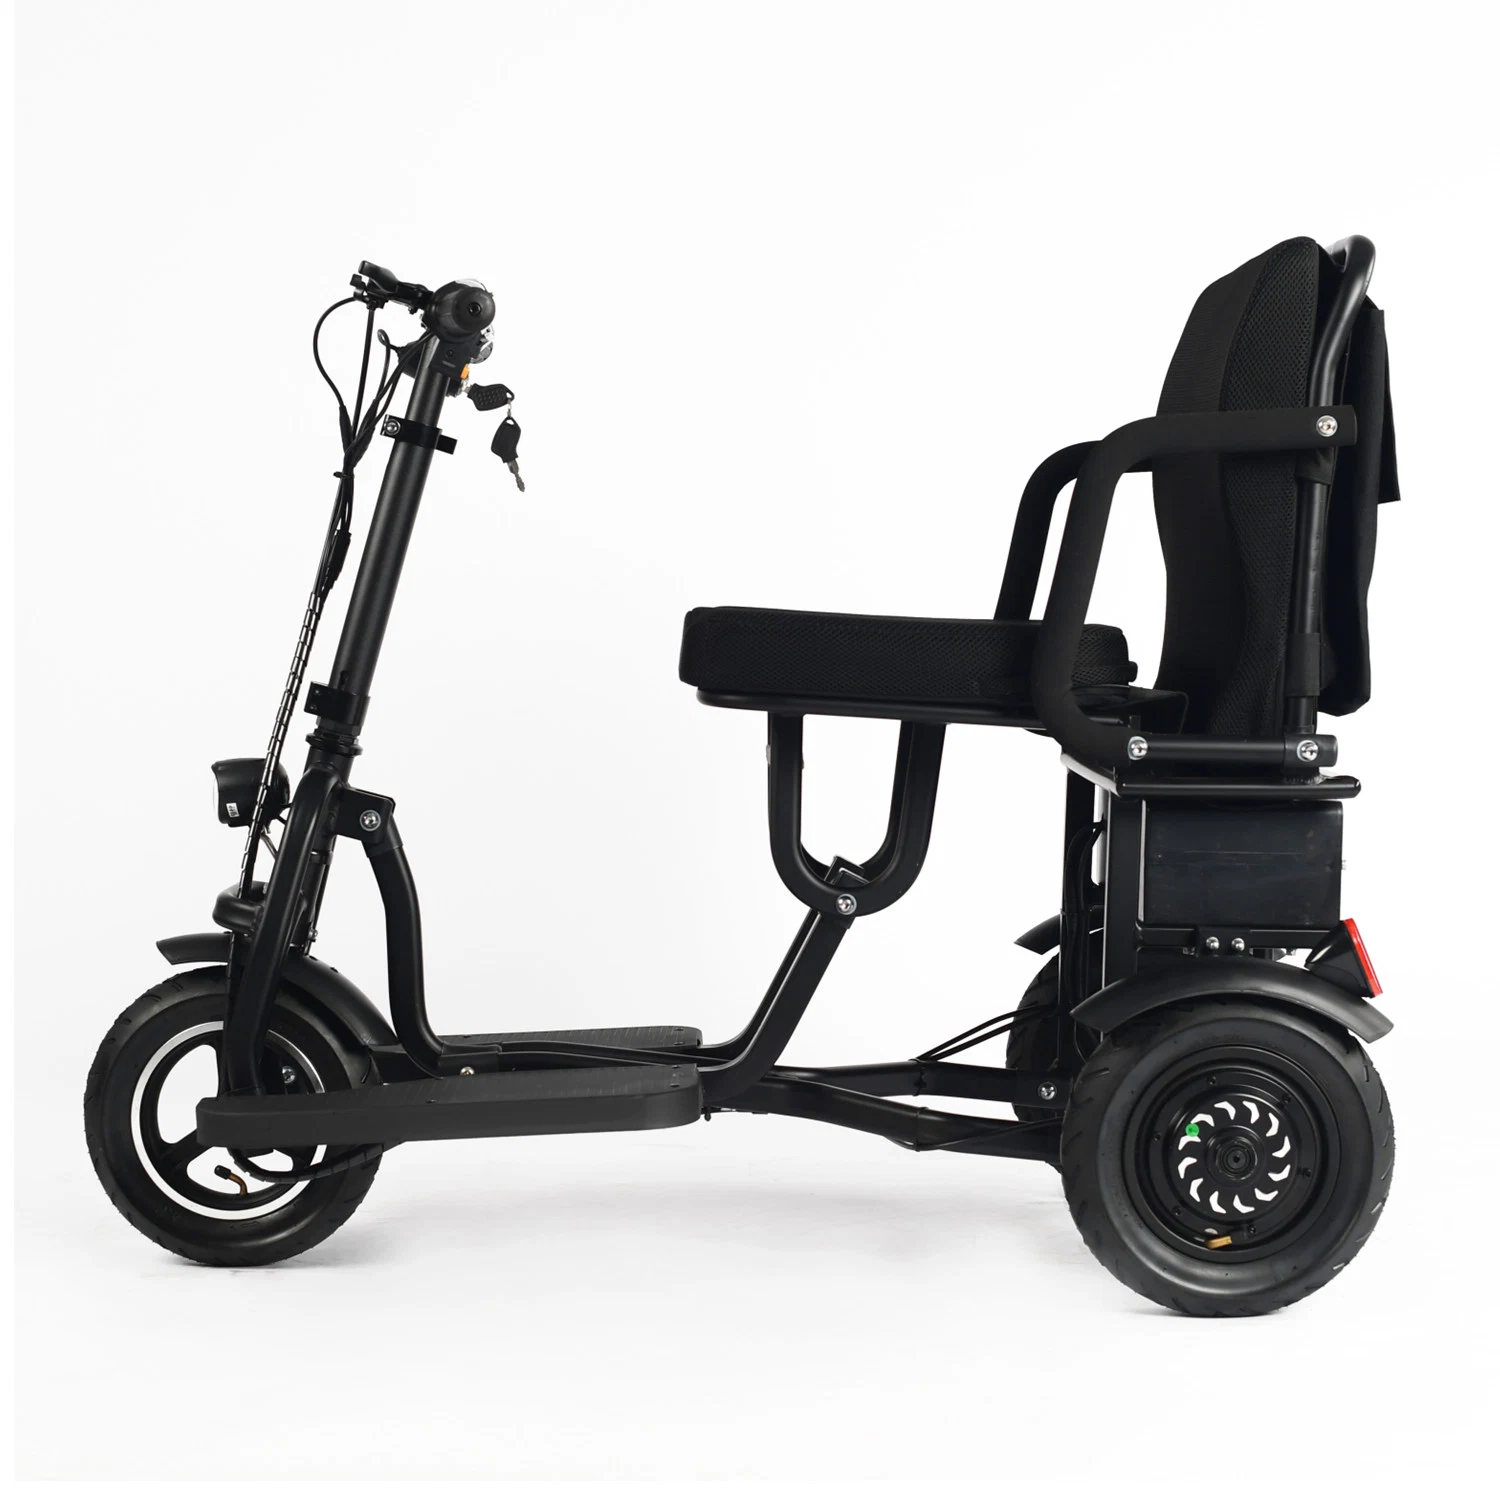 Portable Folding 3 Wheel Electric Bicycle Scooter with Seat for The Disability People